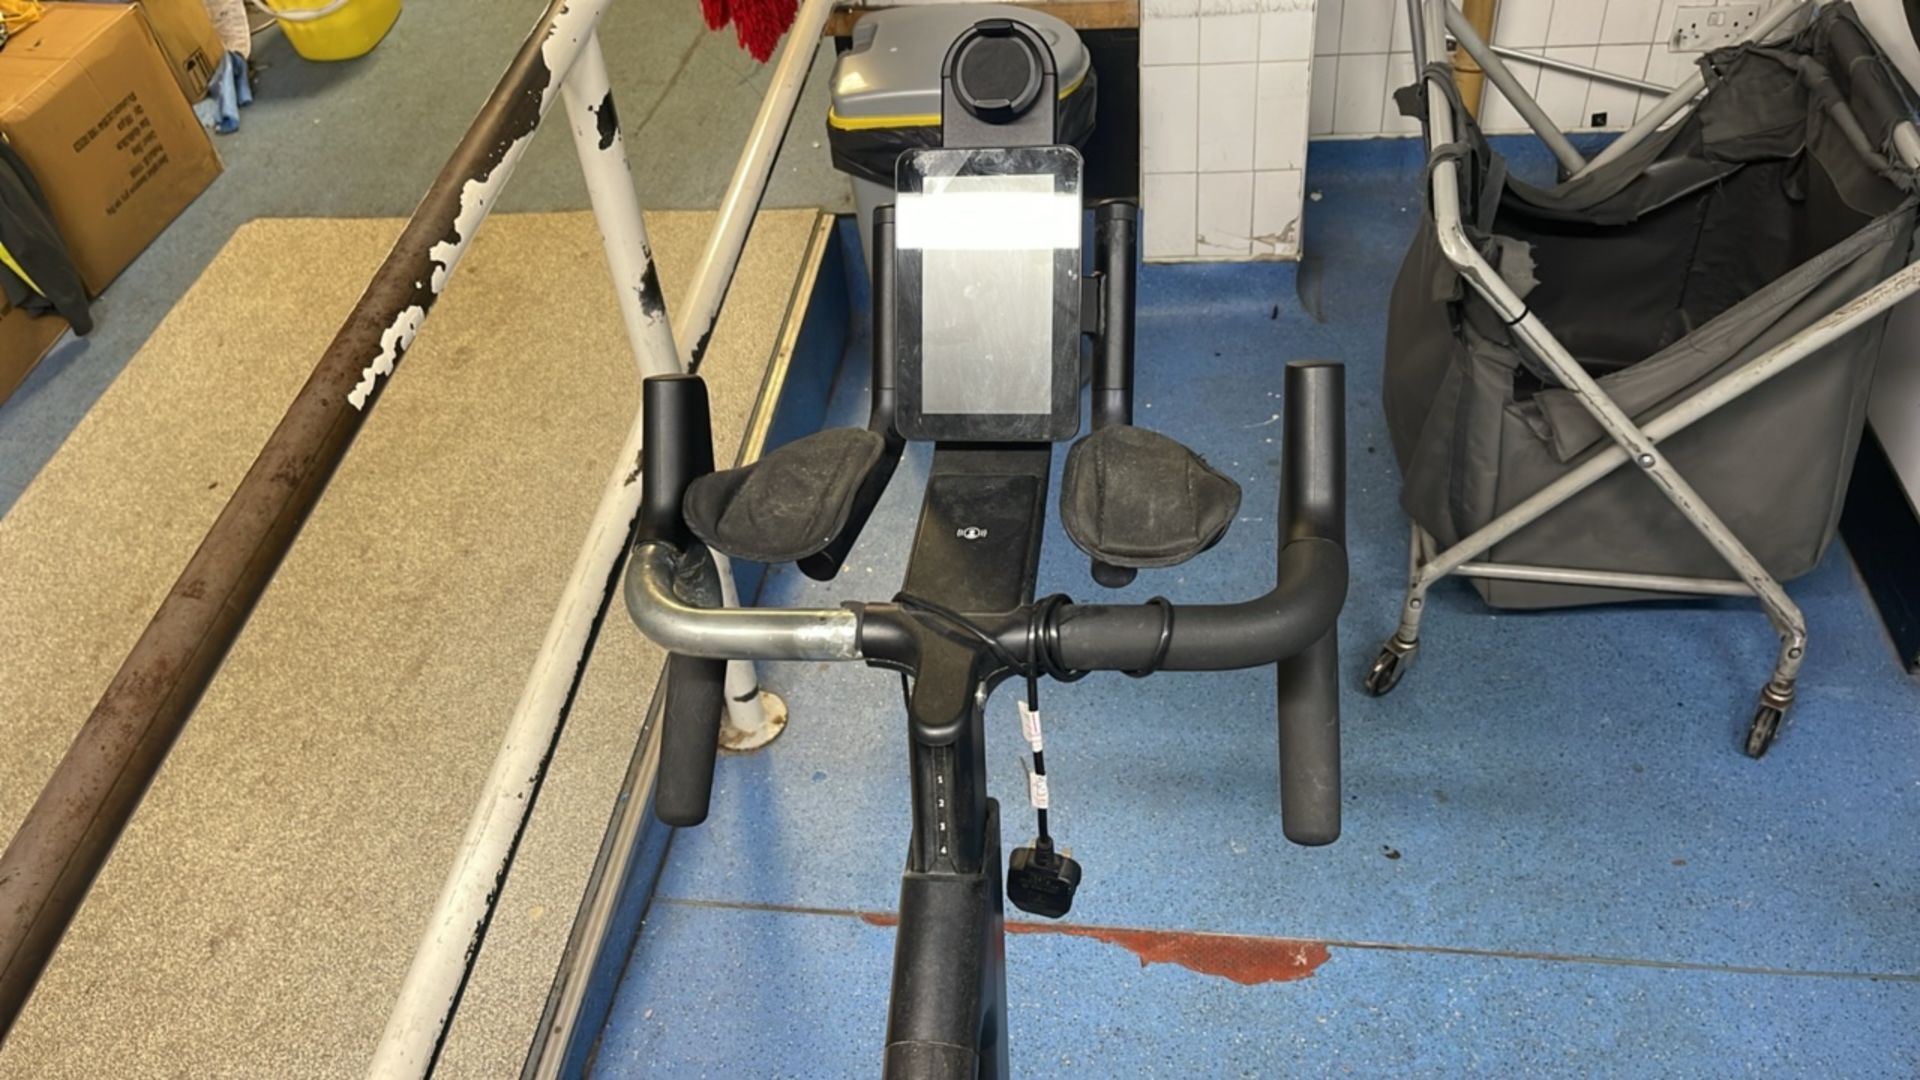 Technogym Bike For Spares & Repairs - Image 2 of 7